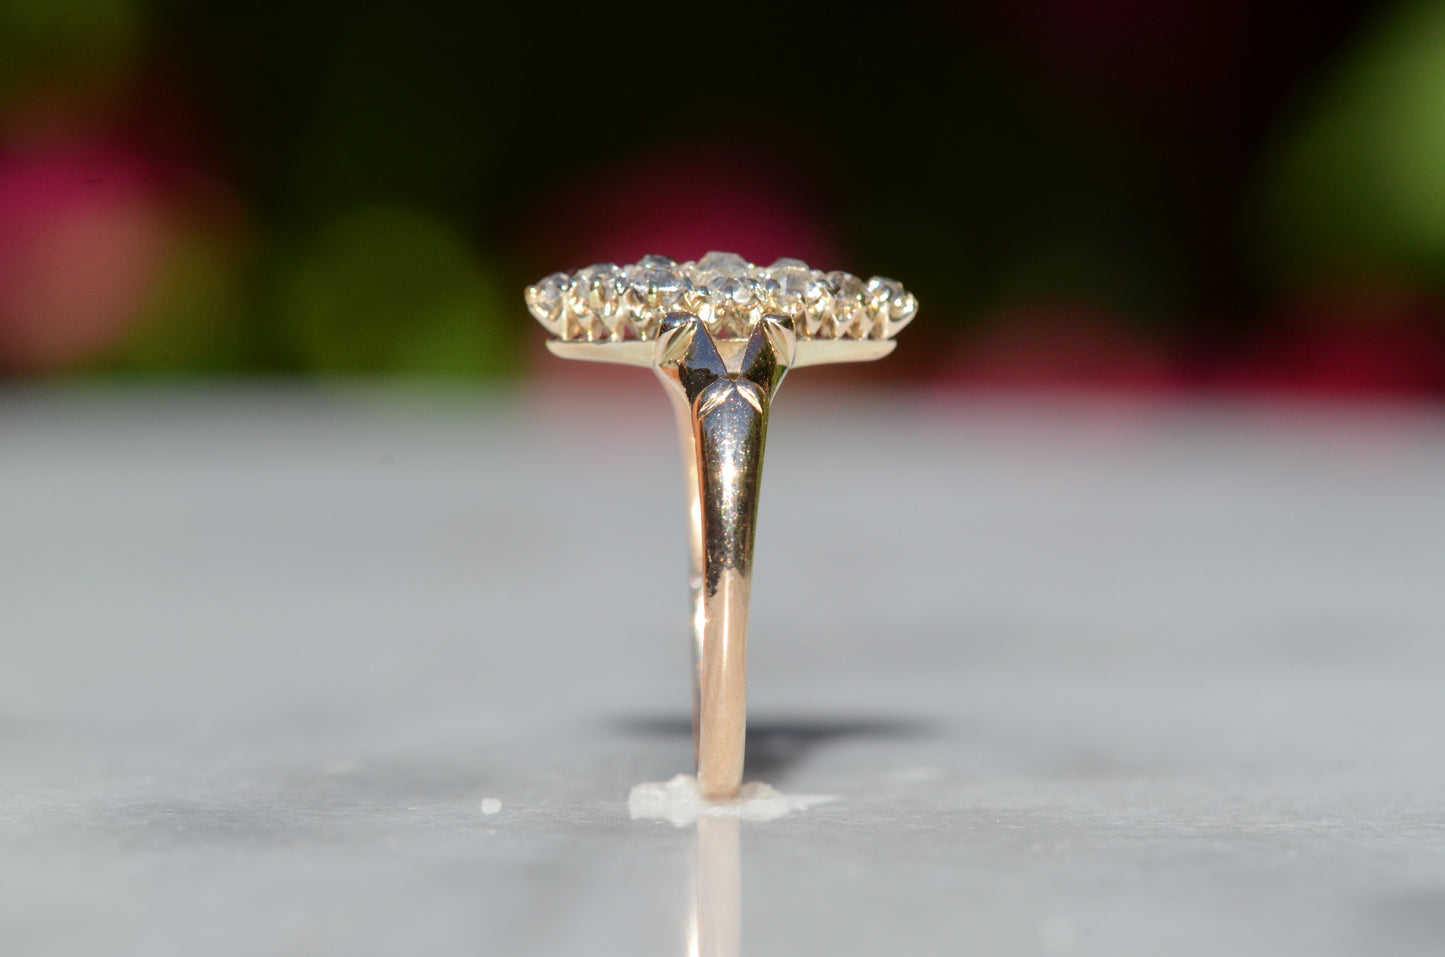 The closely cropped macro of this Victorian diamond navette ring is photographed positioned upright and viewed from the side to highlight the profile of the ring.